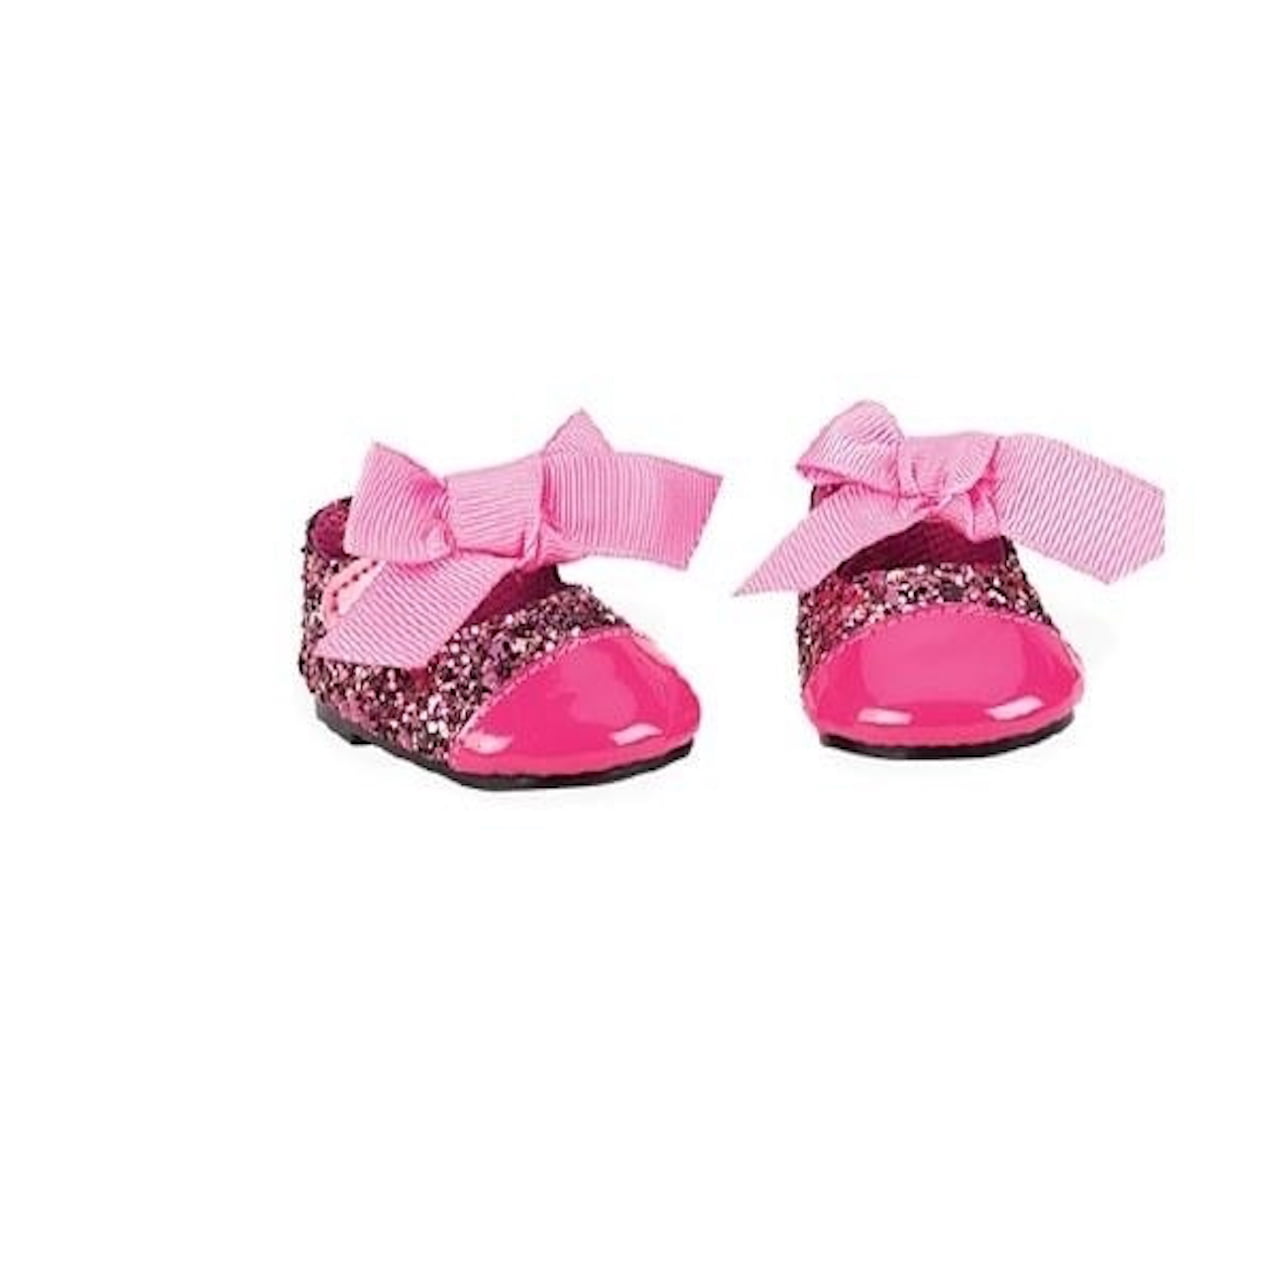 Our Generation Glittering Fuchsia Shoes for 18